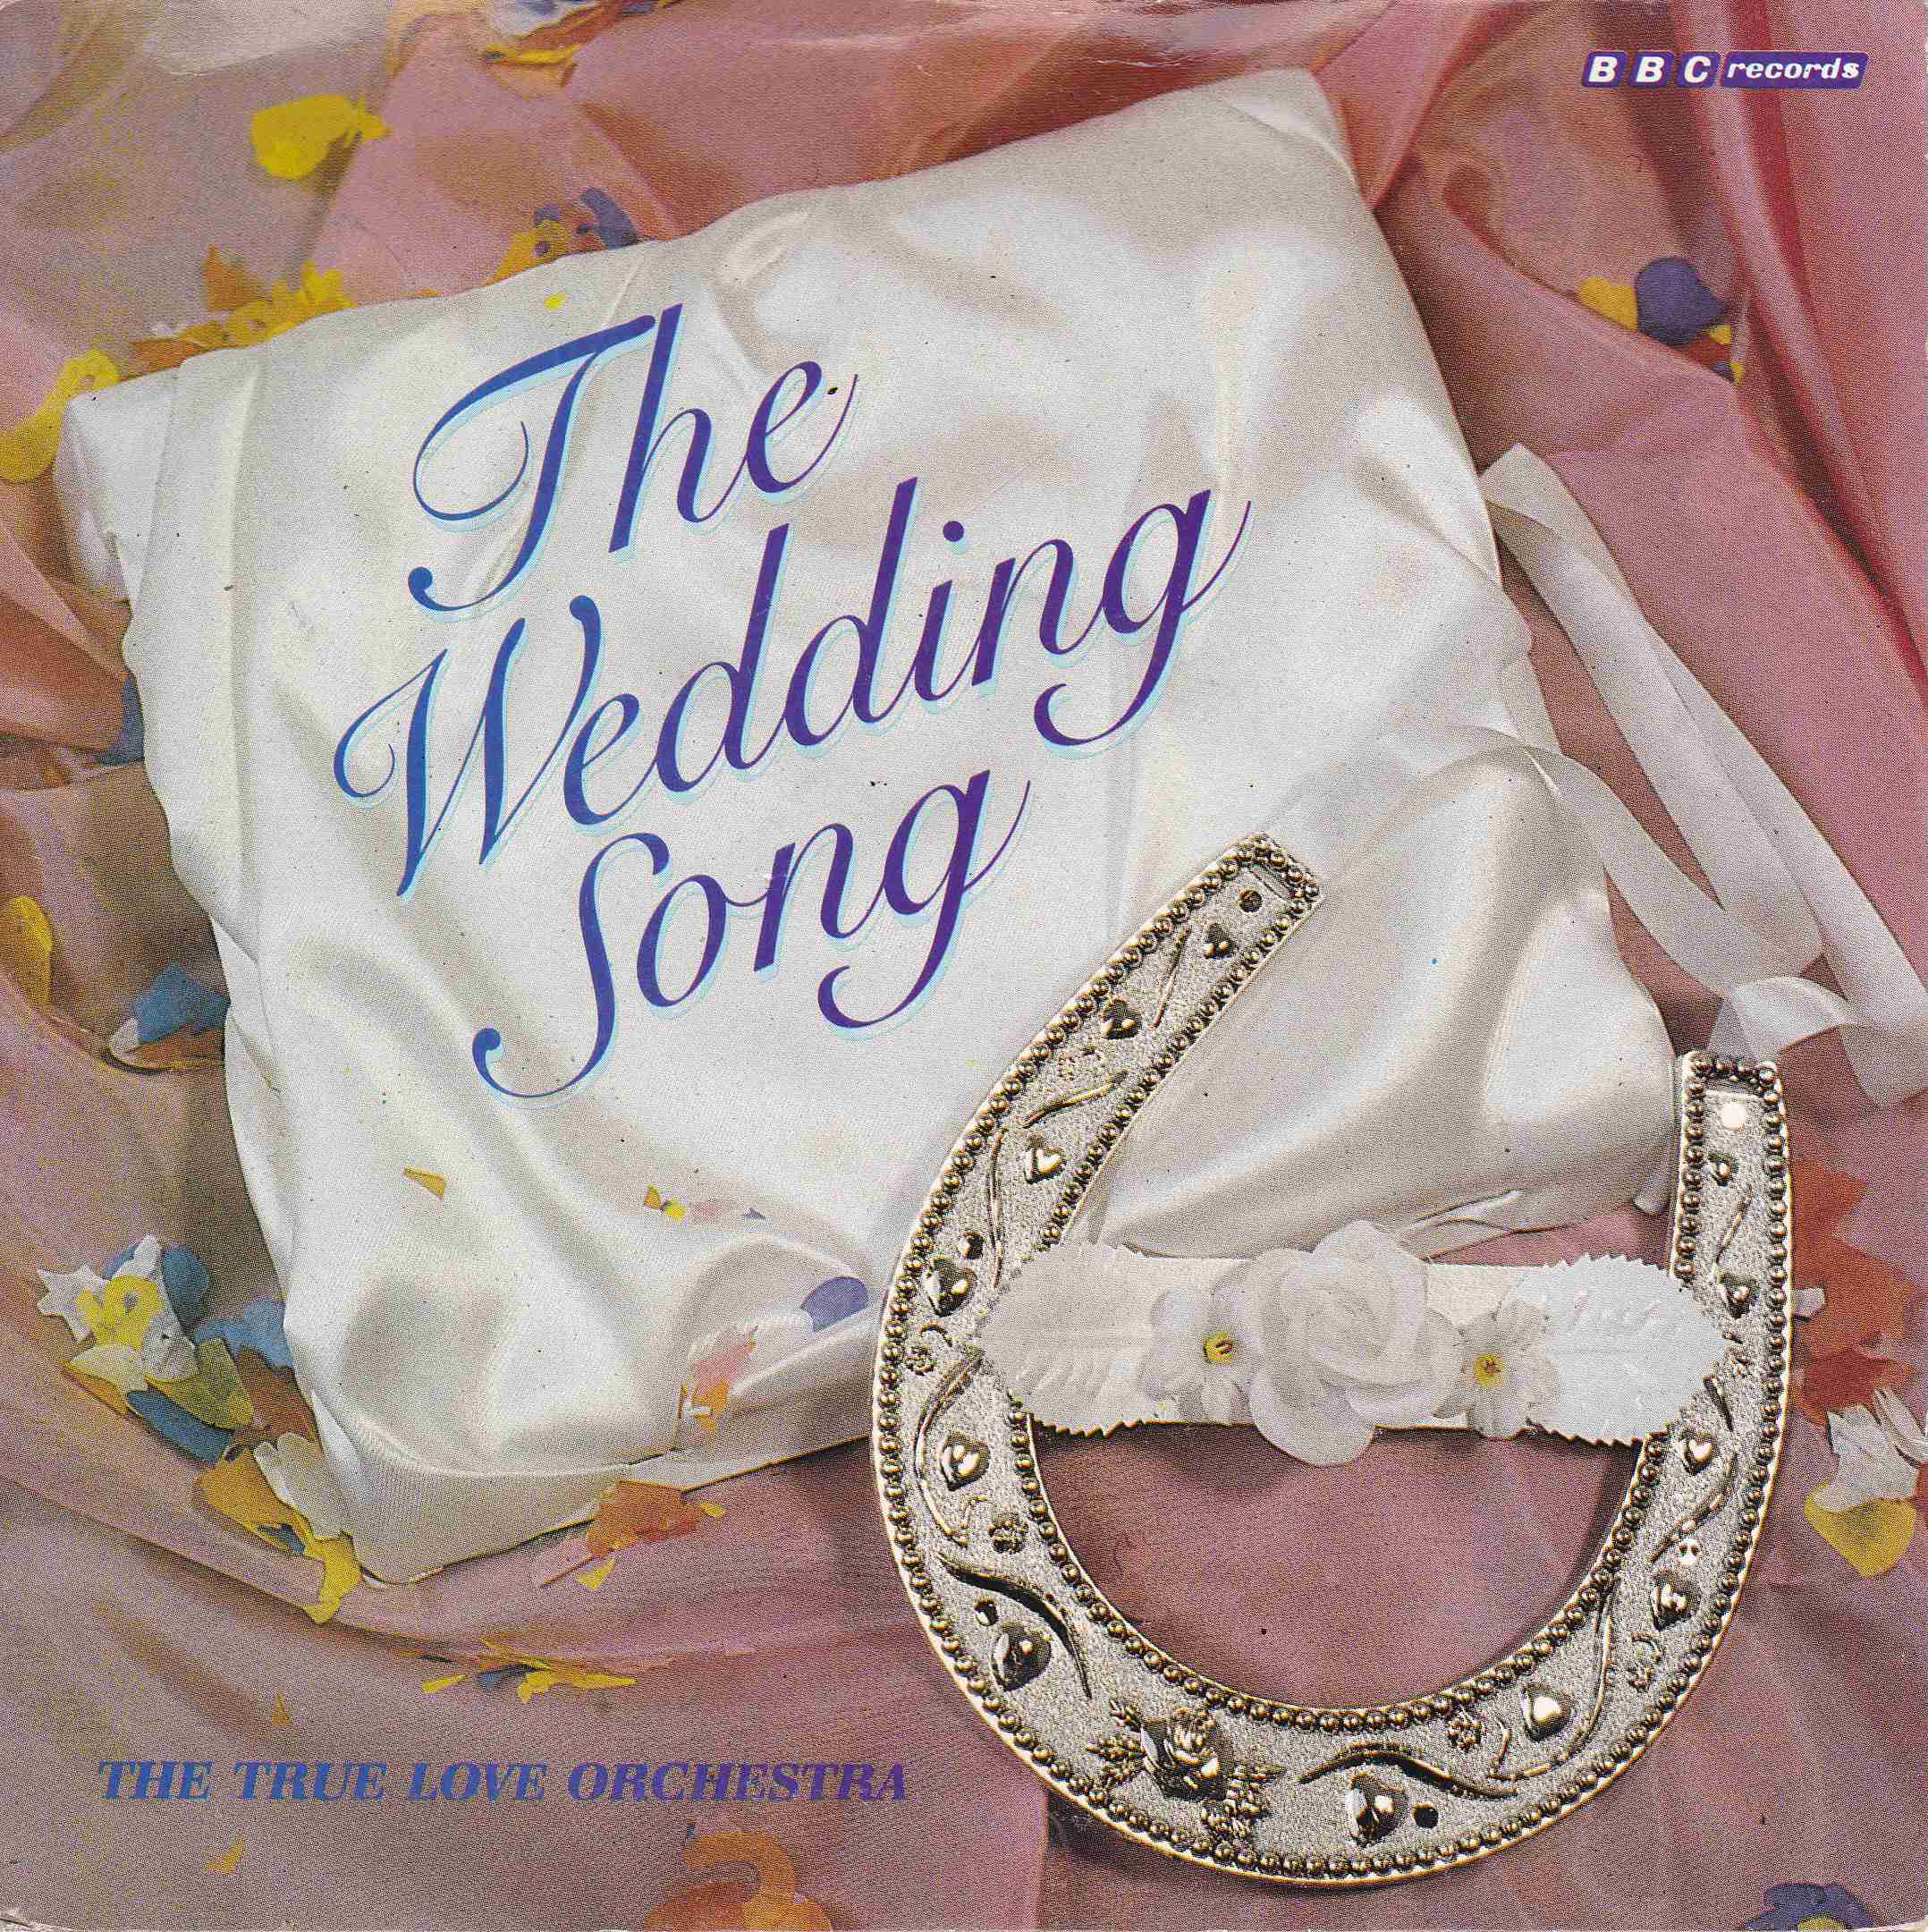 Picture of RESL 194 The wedding song by artist John MacCalman / The True Love Orchestra from the BBC records and Tapes library